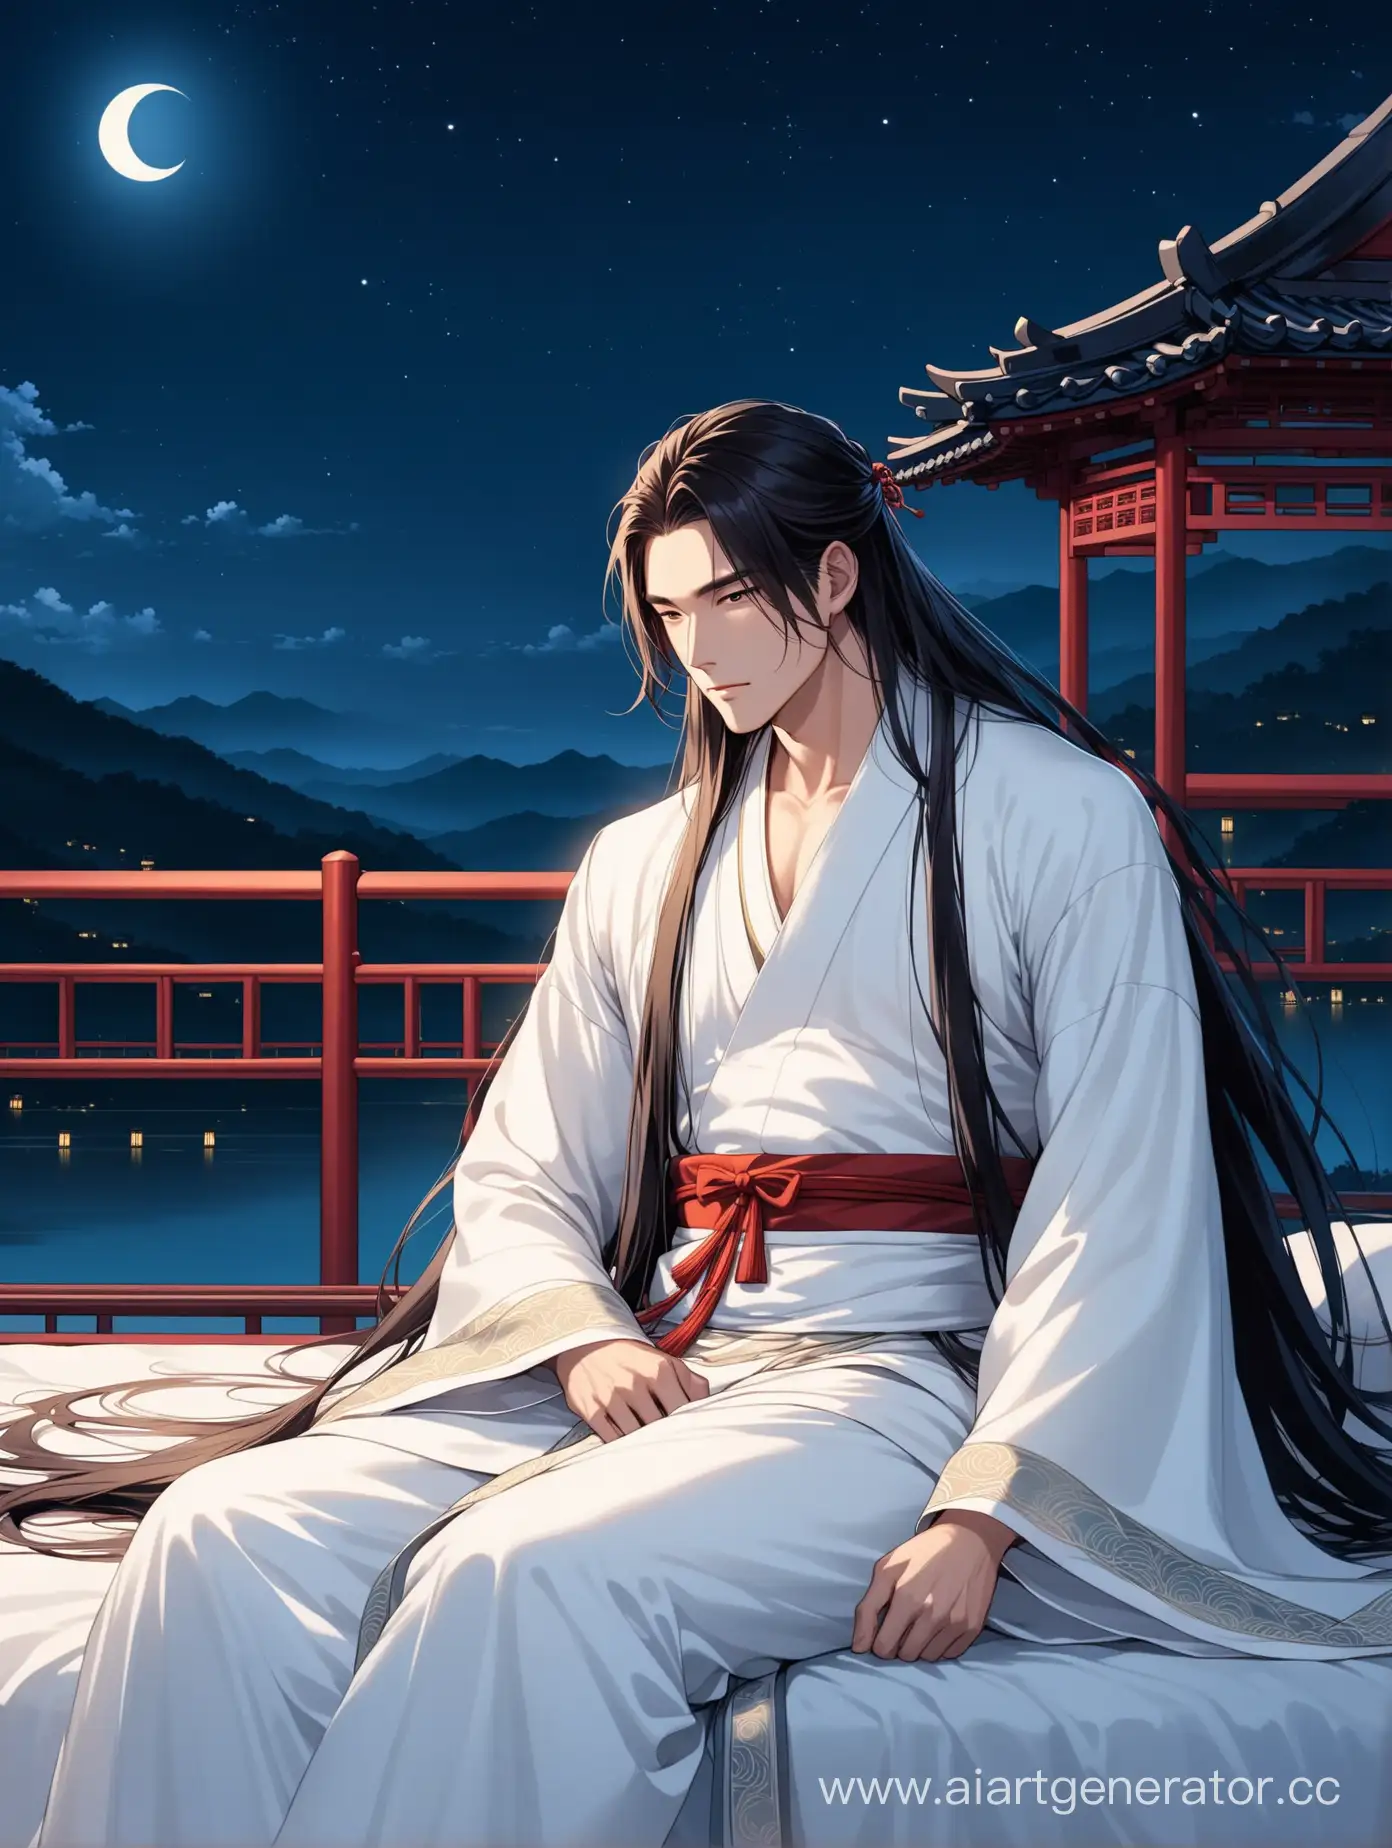 Elegant-Men-Admiring-a-Man-in-Bed-with-Long-Hair-and-White-Hanfu-Amidst-a-Moonlit-Night